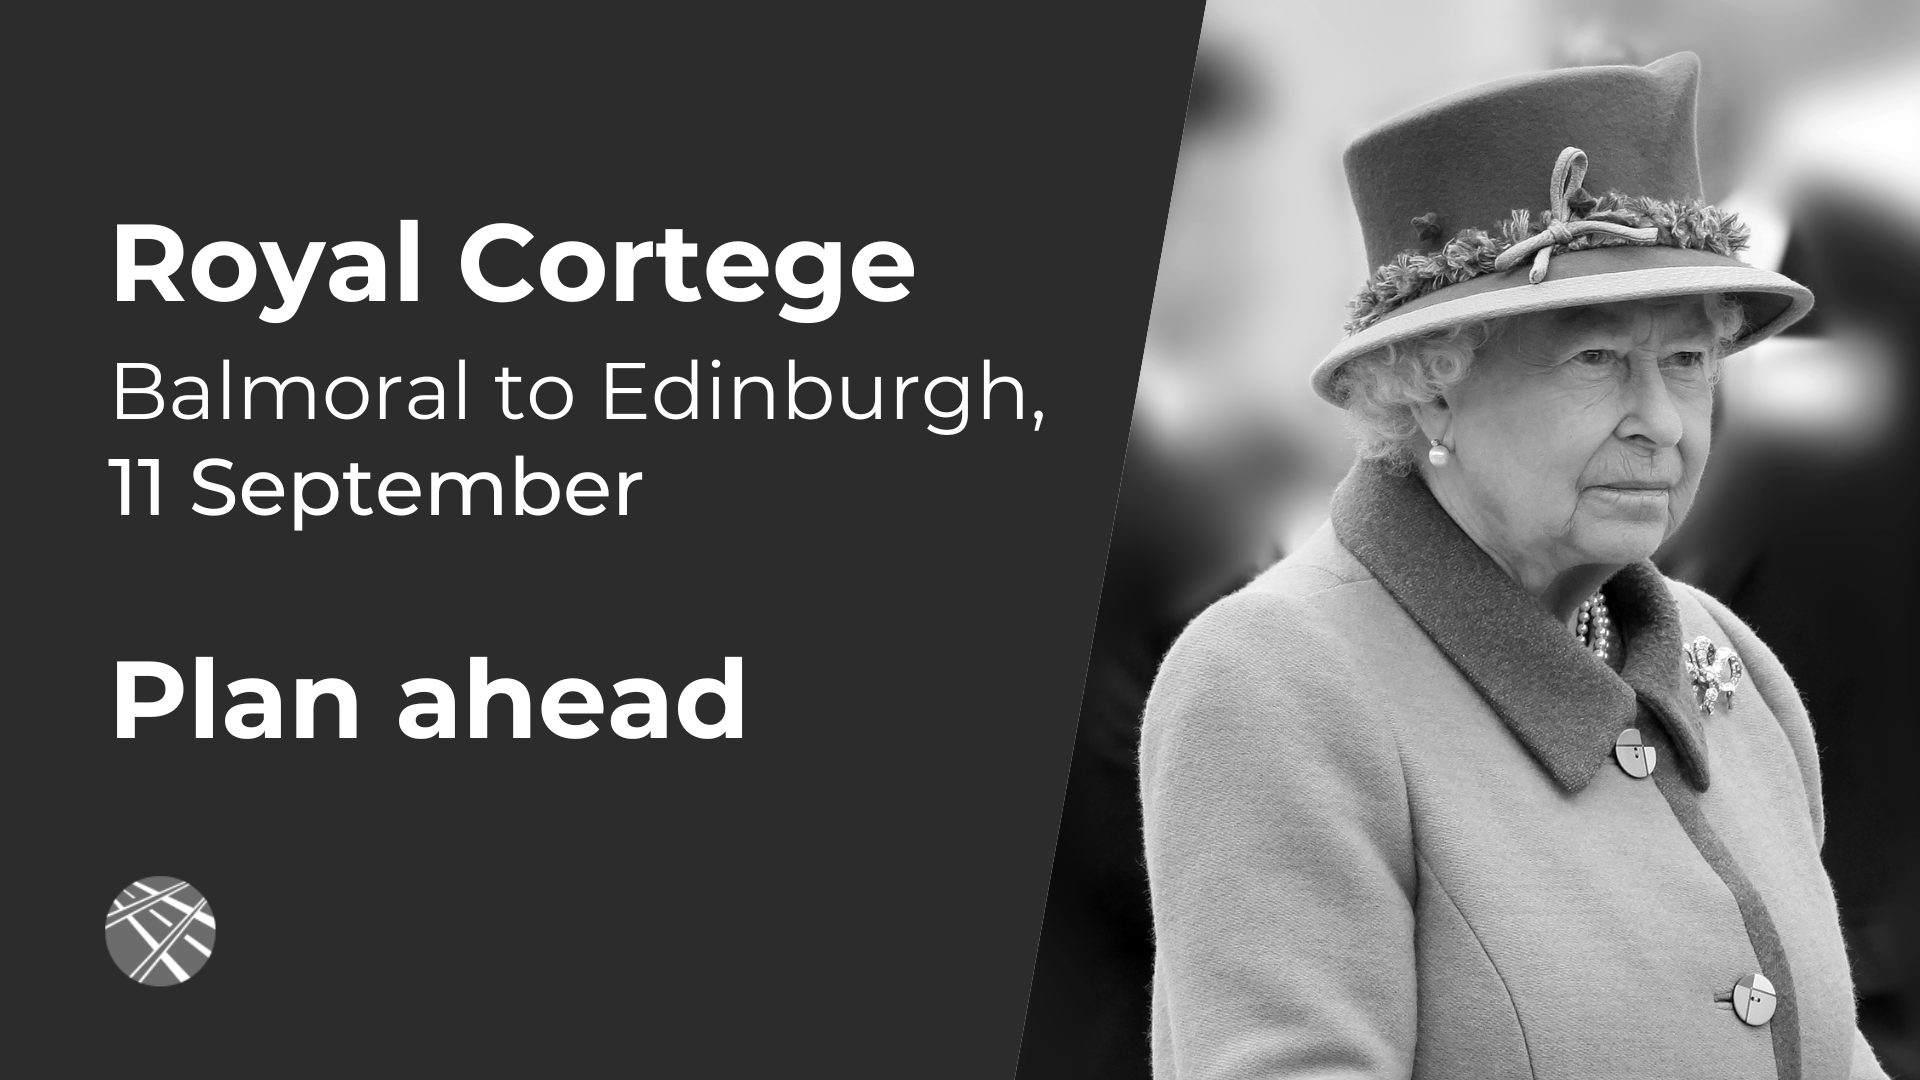 Her Majesty the Queen, black and white photo on a dark background with text saying "Royal Cortege. Balmoral to Edinburgh, 11 September. Plan ahead."